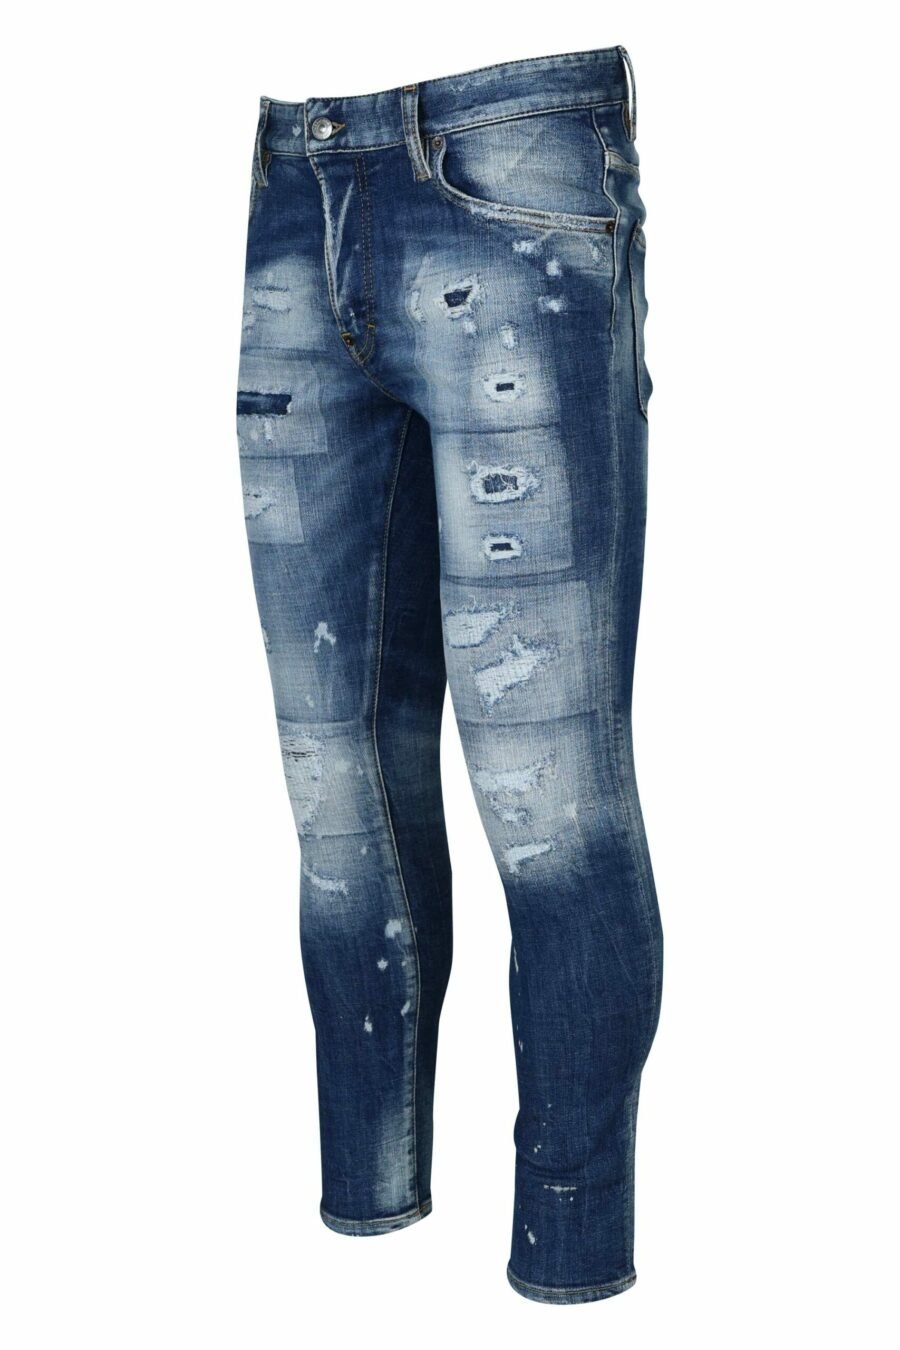 Blue "super twinky jean" jeans with rips - 8054148339029 1 scaled